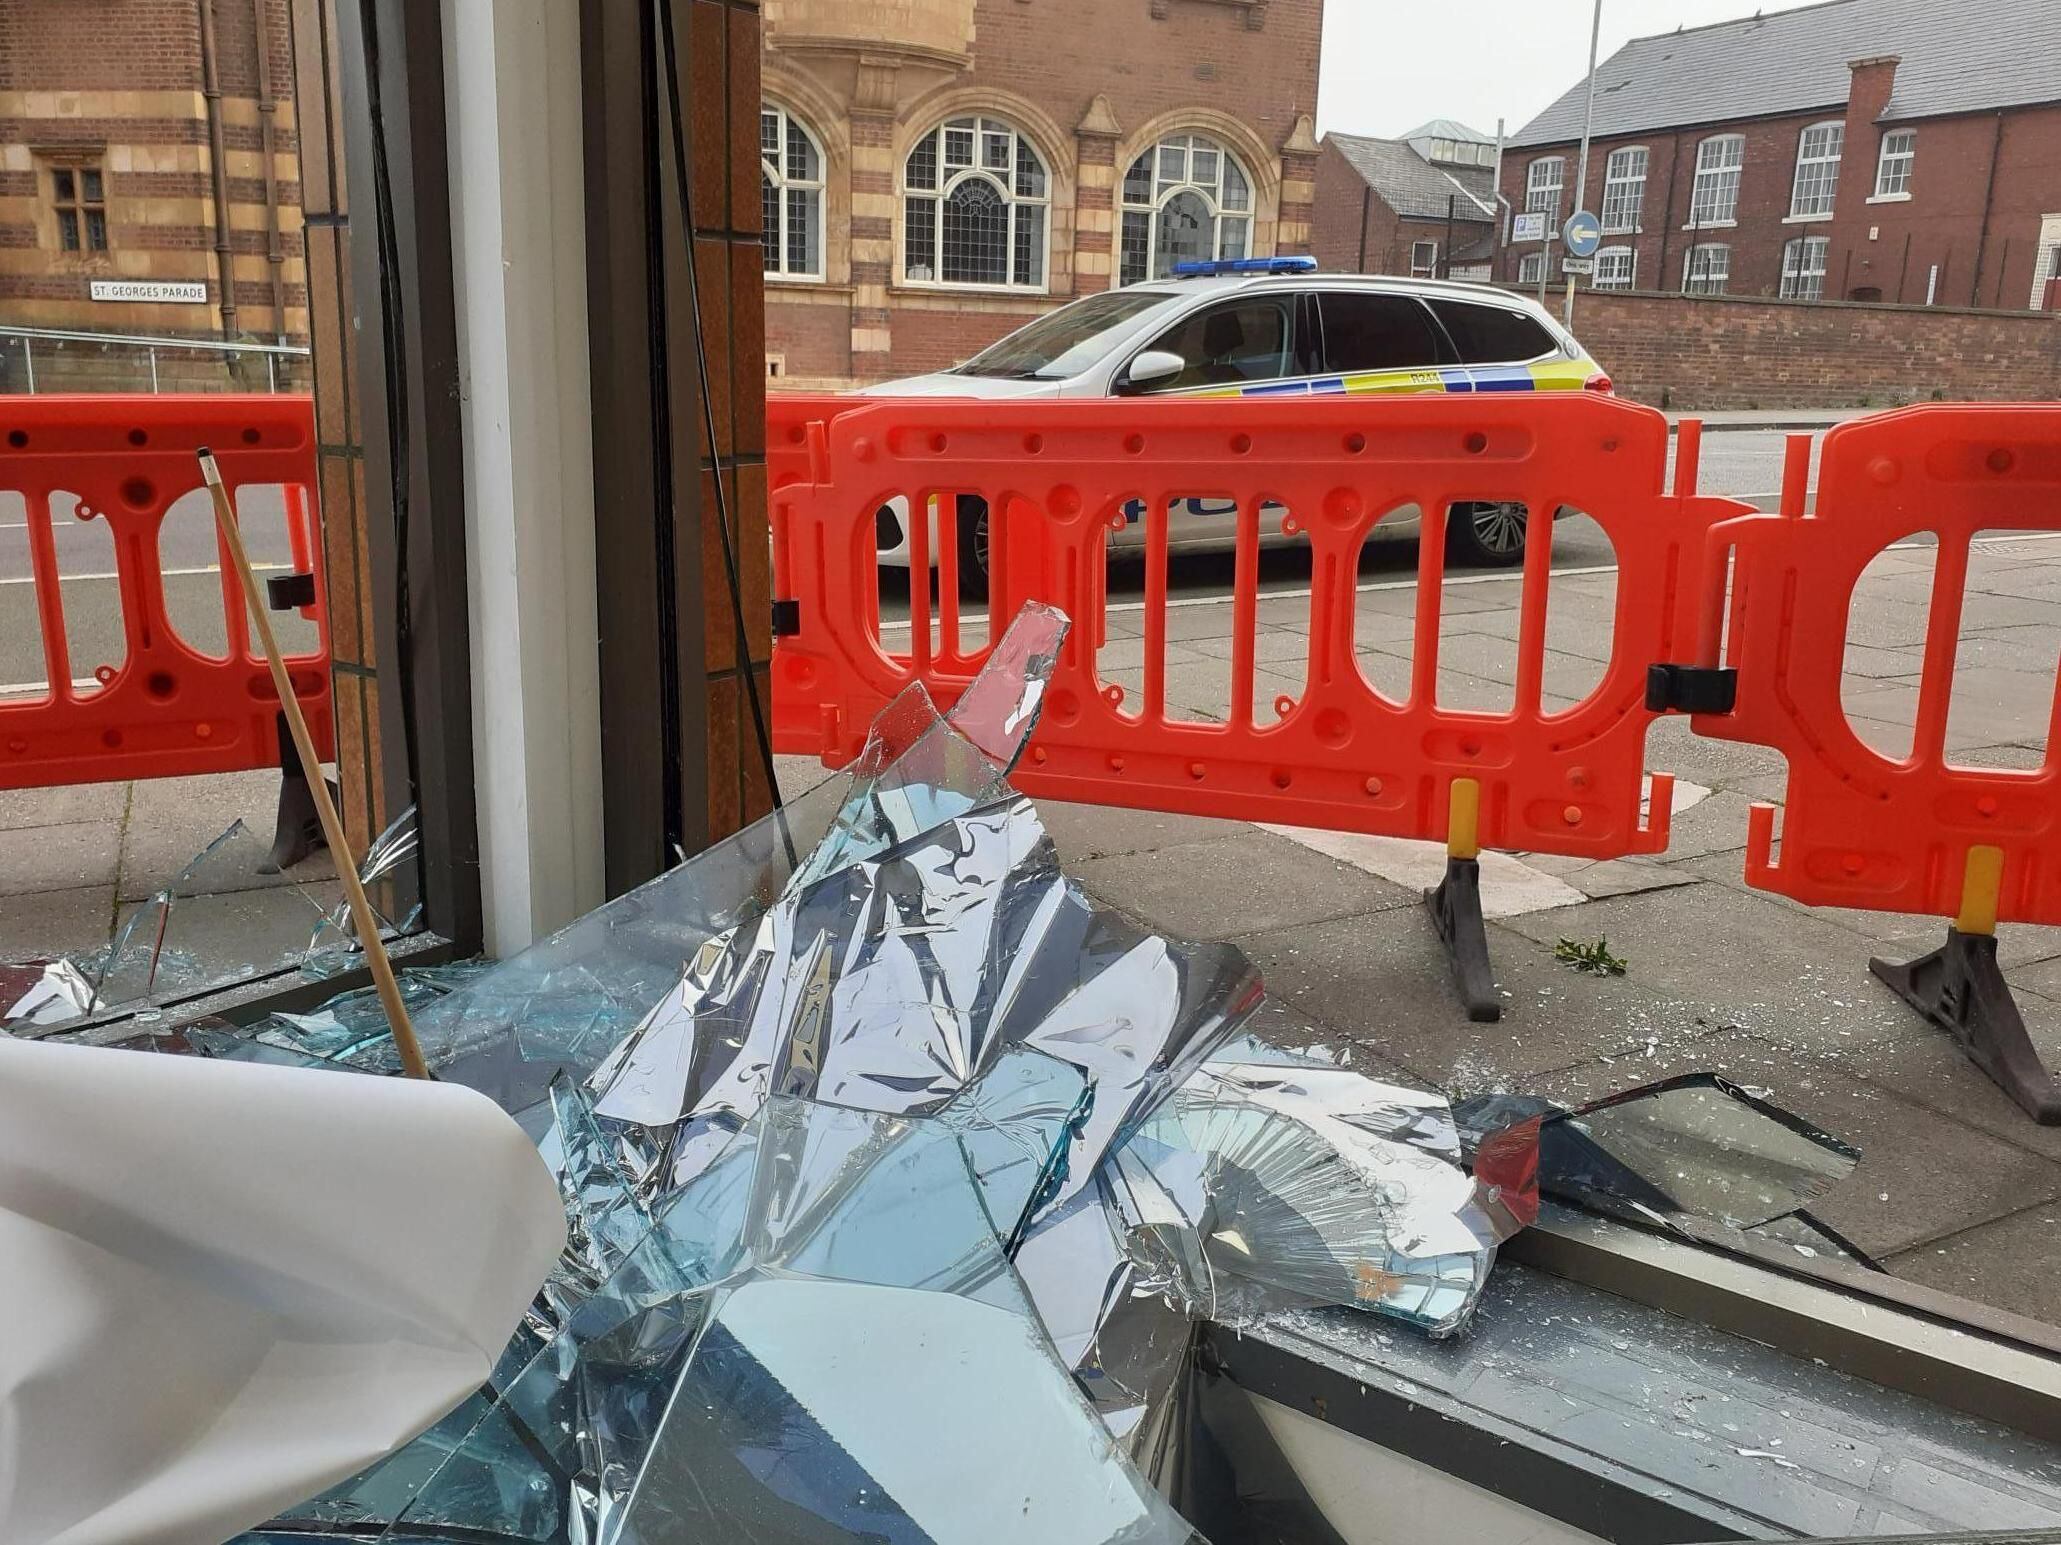 Staff 'devastated' after thousands of pounds worth of damage caused to Wolverhampton charity shop